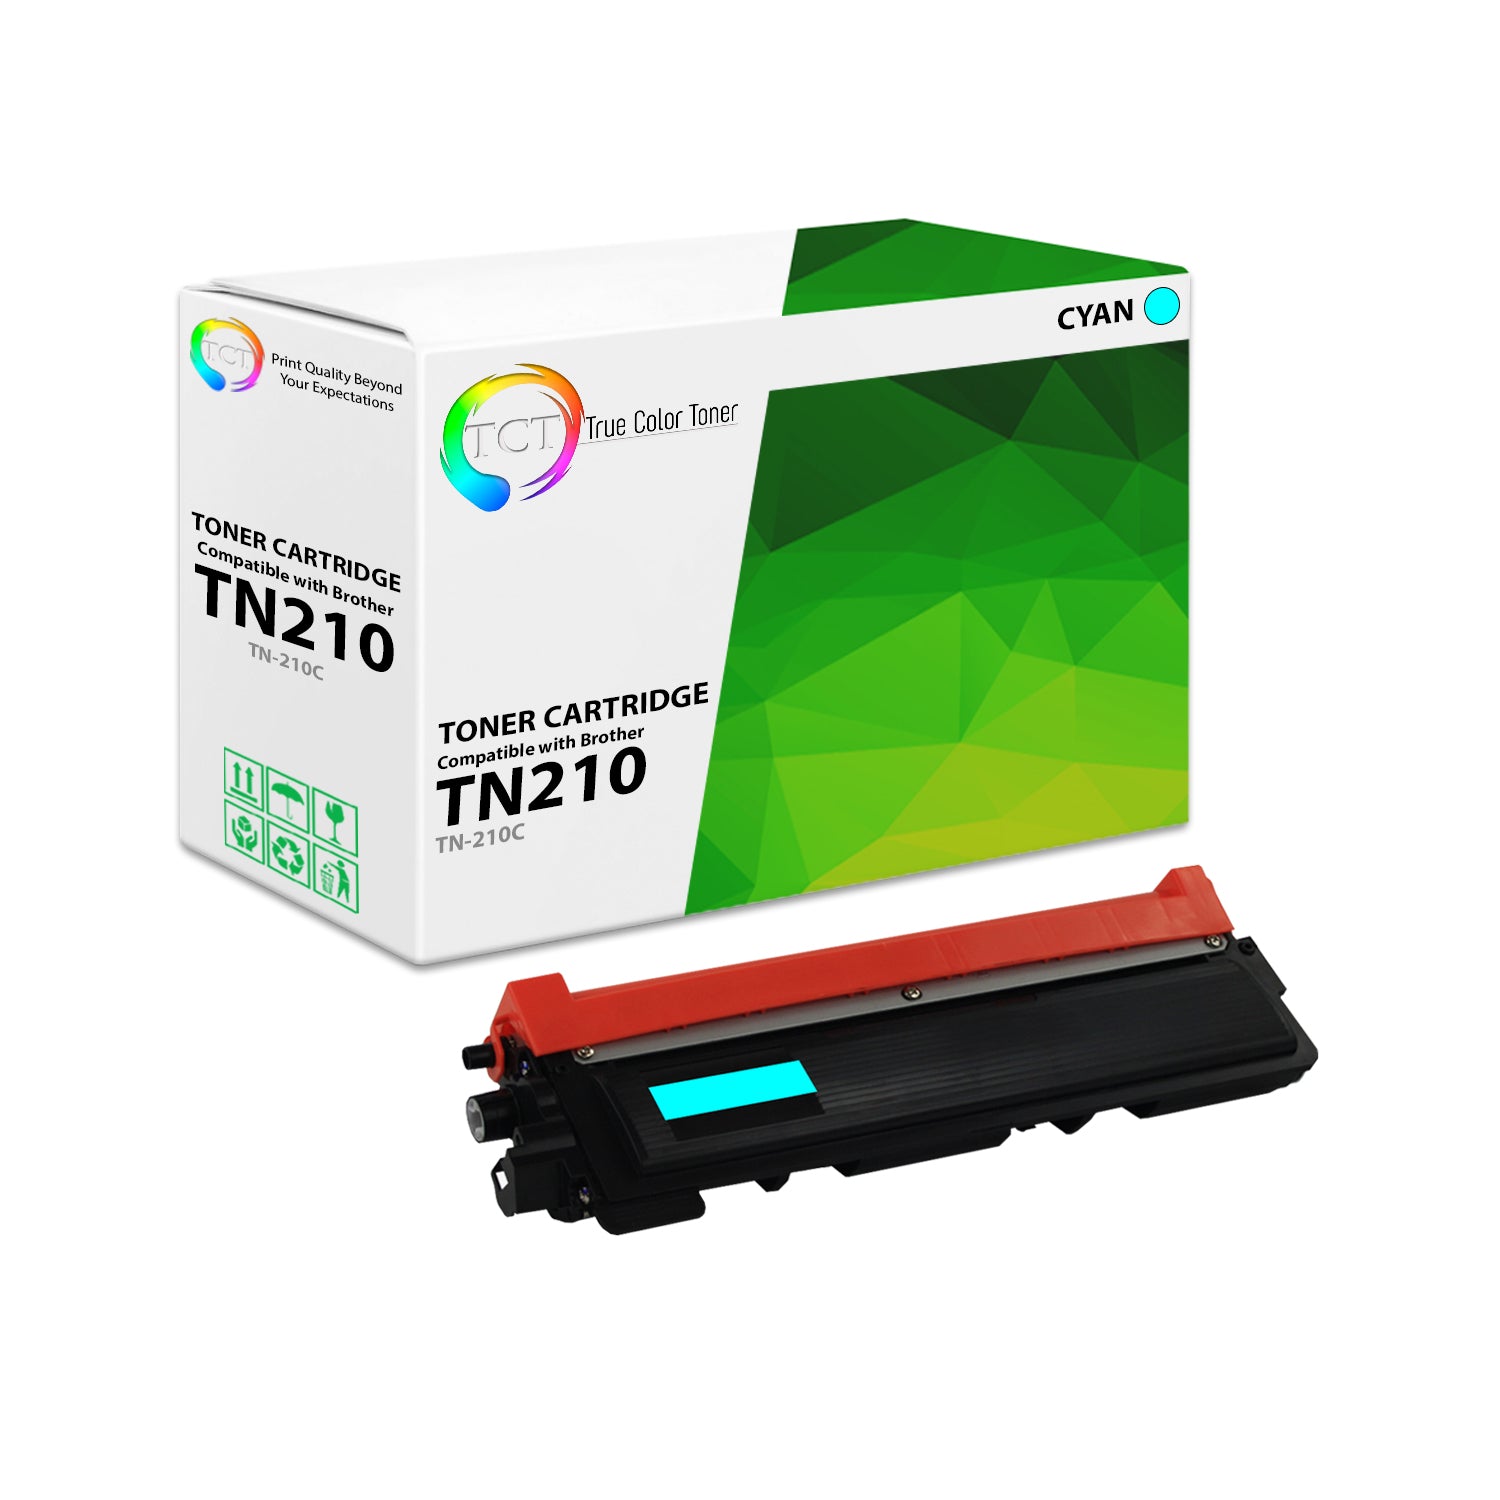 TCT Compatible Toner Cartridge Replacement for the Brother TN210 Series - 1 Pack Cyan